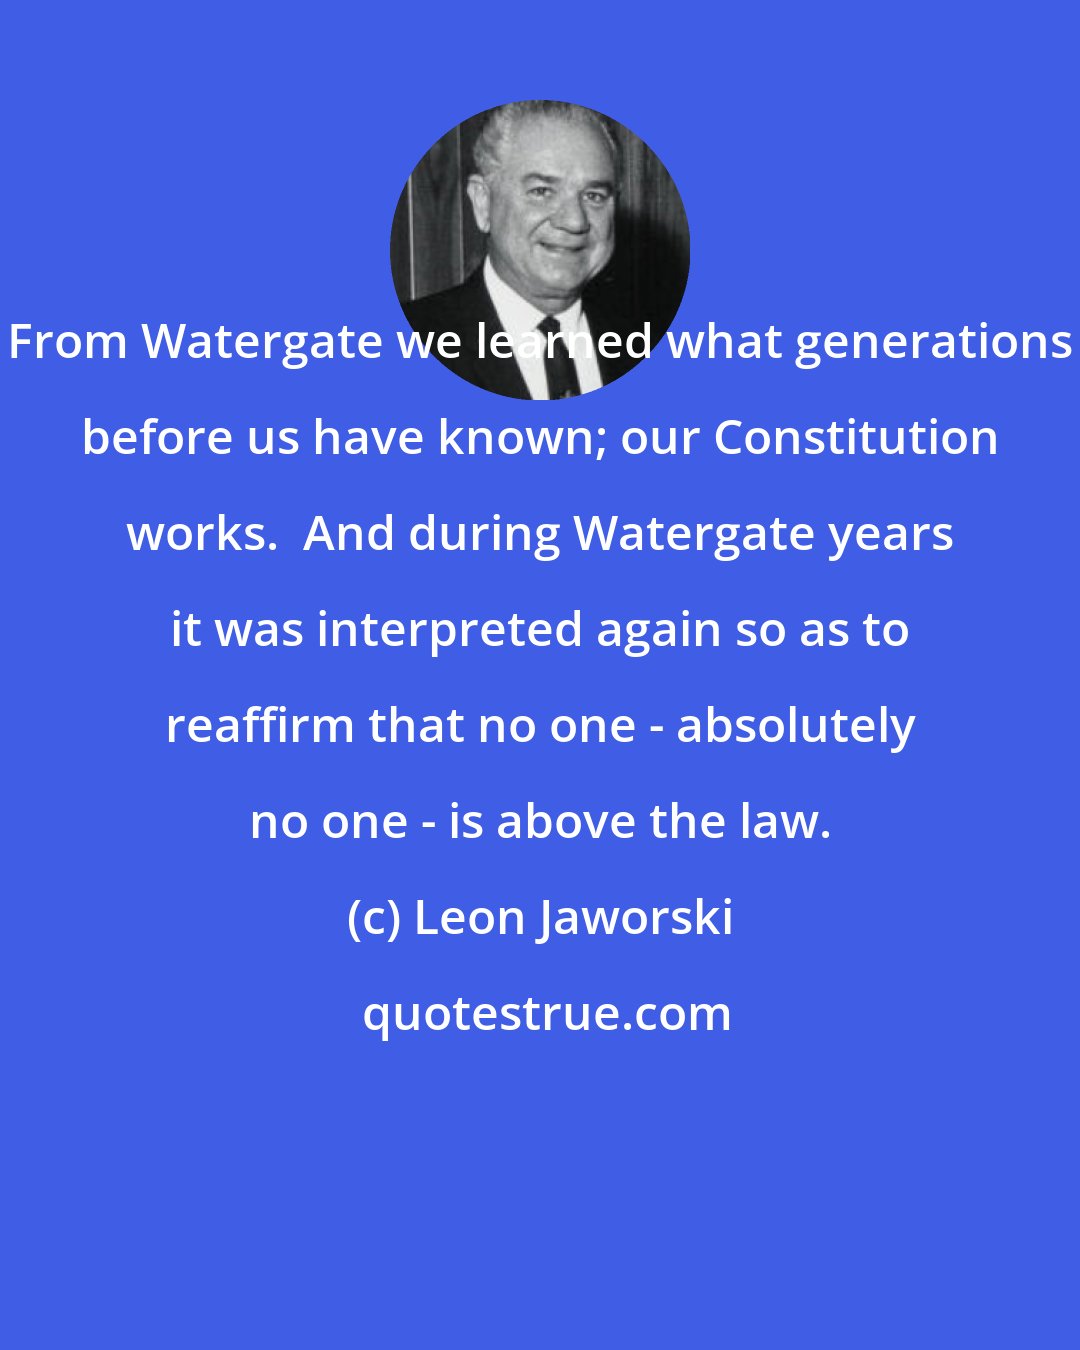 Leon Jaworski: From Watergate we learned what generations before us have known; our Constitution works.  And during Watergate years it was interpreted again so as to reaffirm that no one - absolutely no one - is above the law.